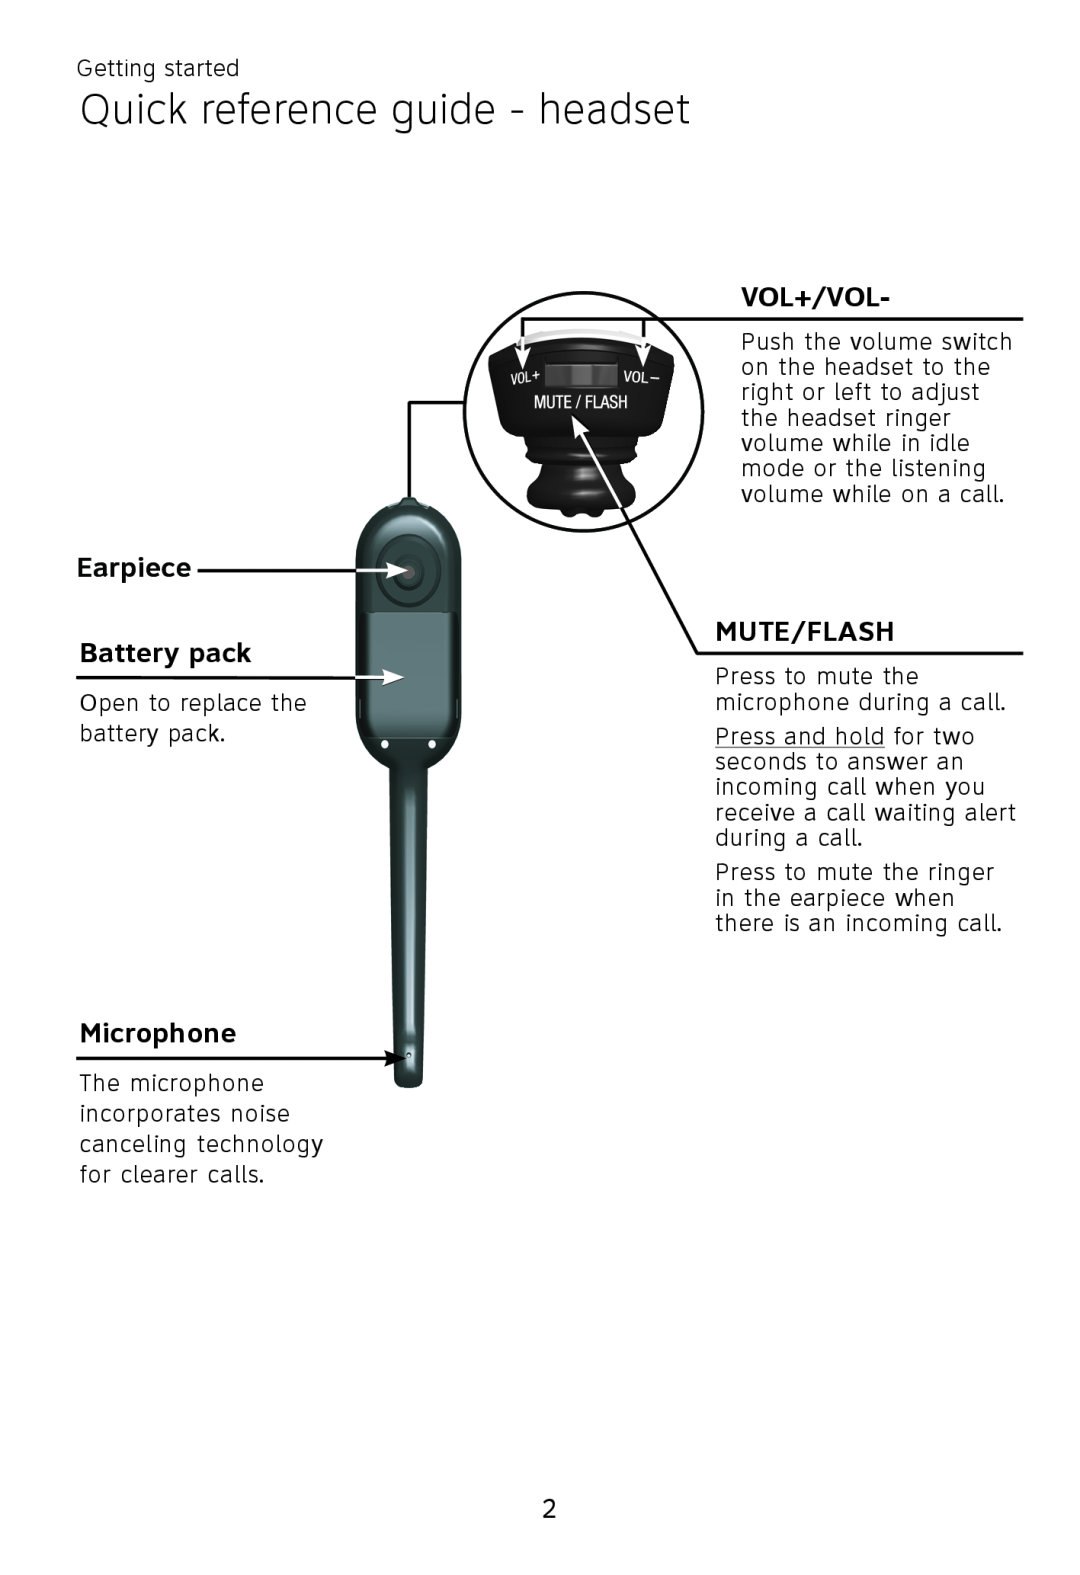 AT&T TL7700 user manual Quick reference guide - headset, Earpiece Battery pack, Microphone, Vol+/Vol, Mute/Flash 